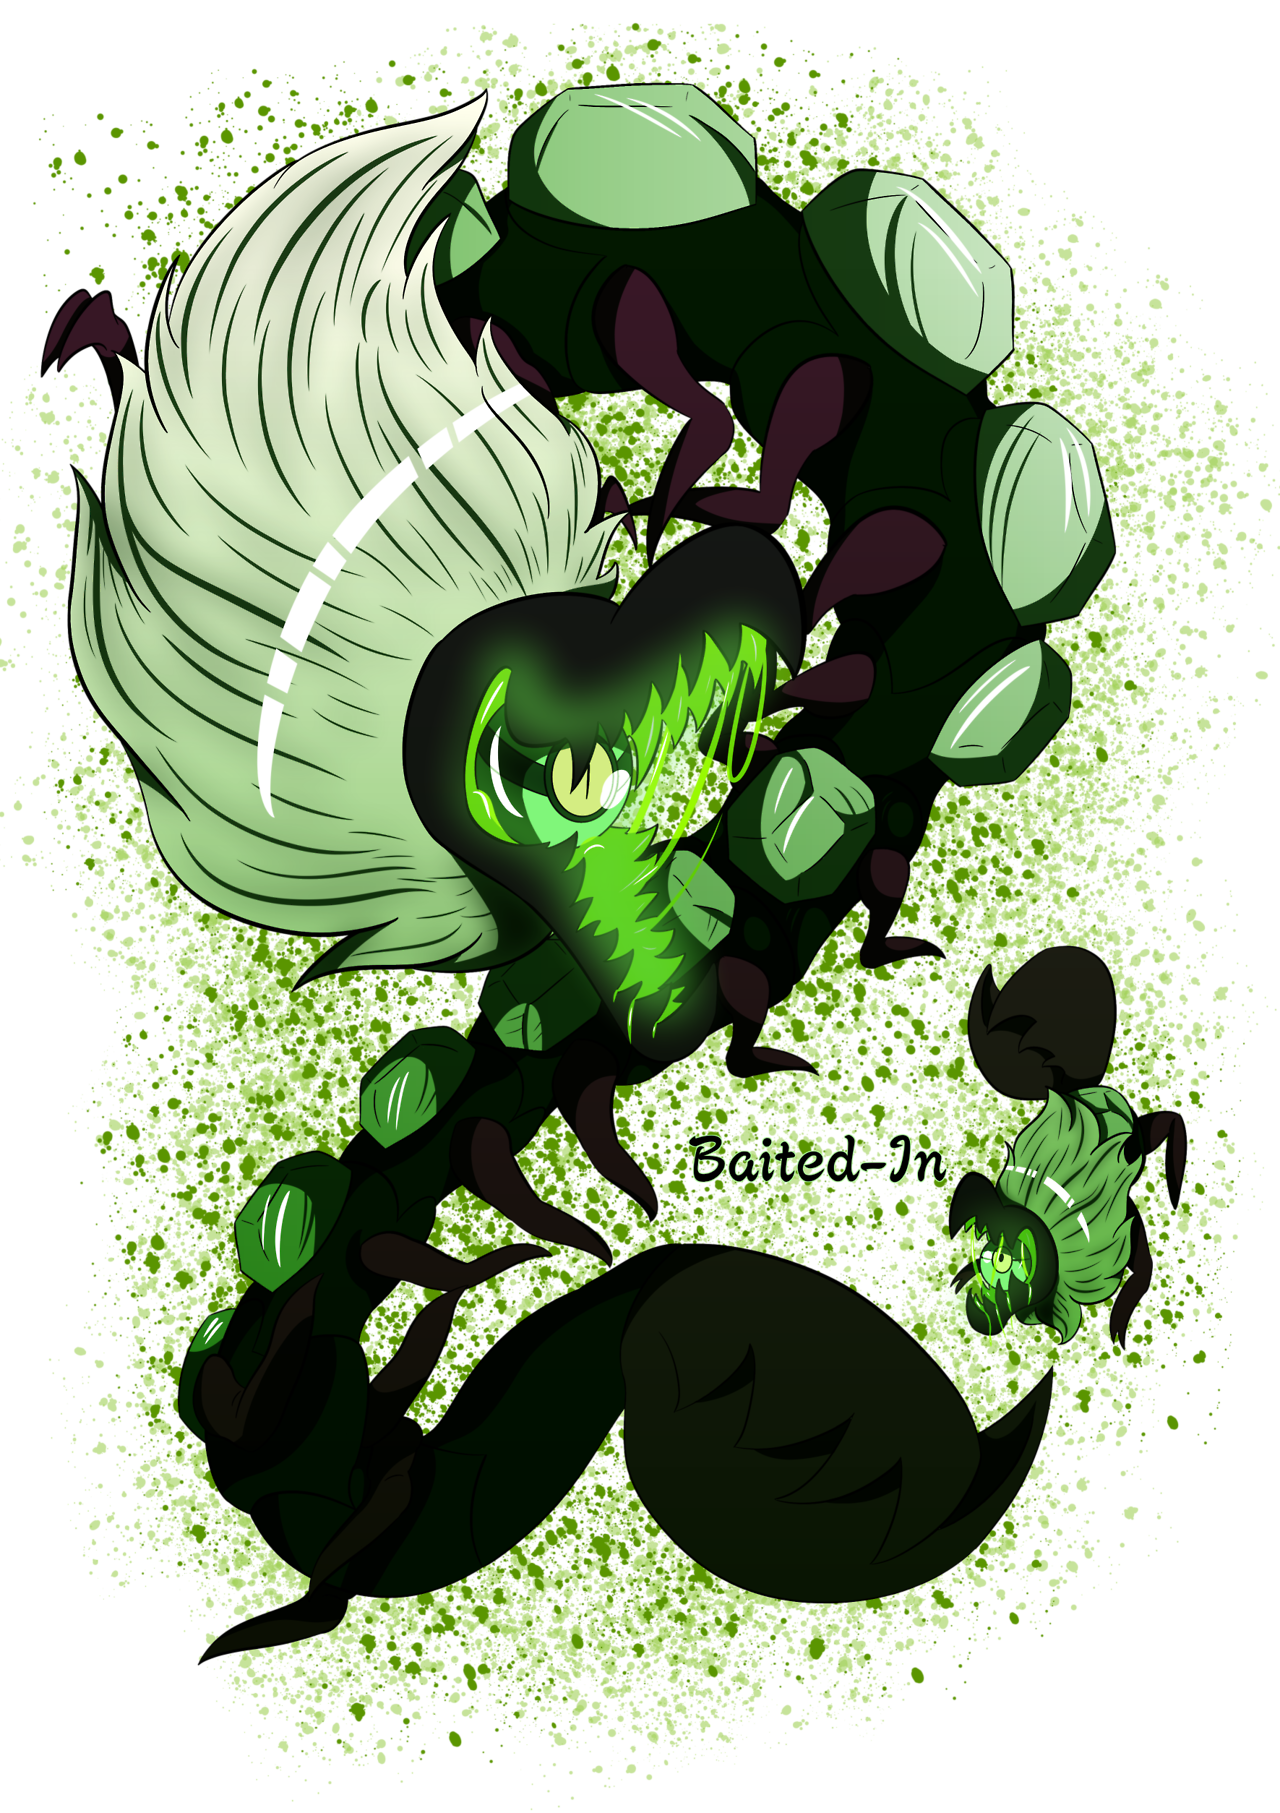 Centipeetle. Sorry guys, this drawing isn’t good, but it was the best I could do.